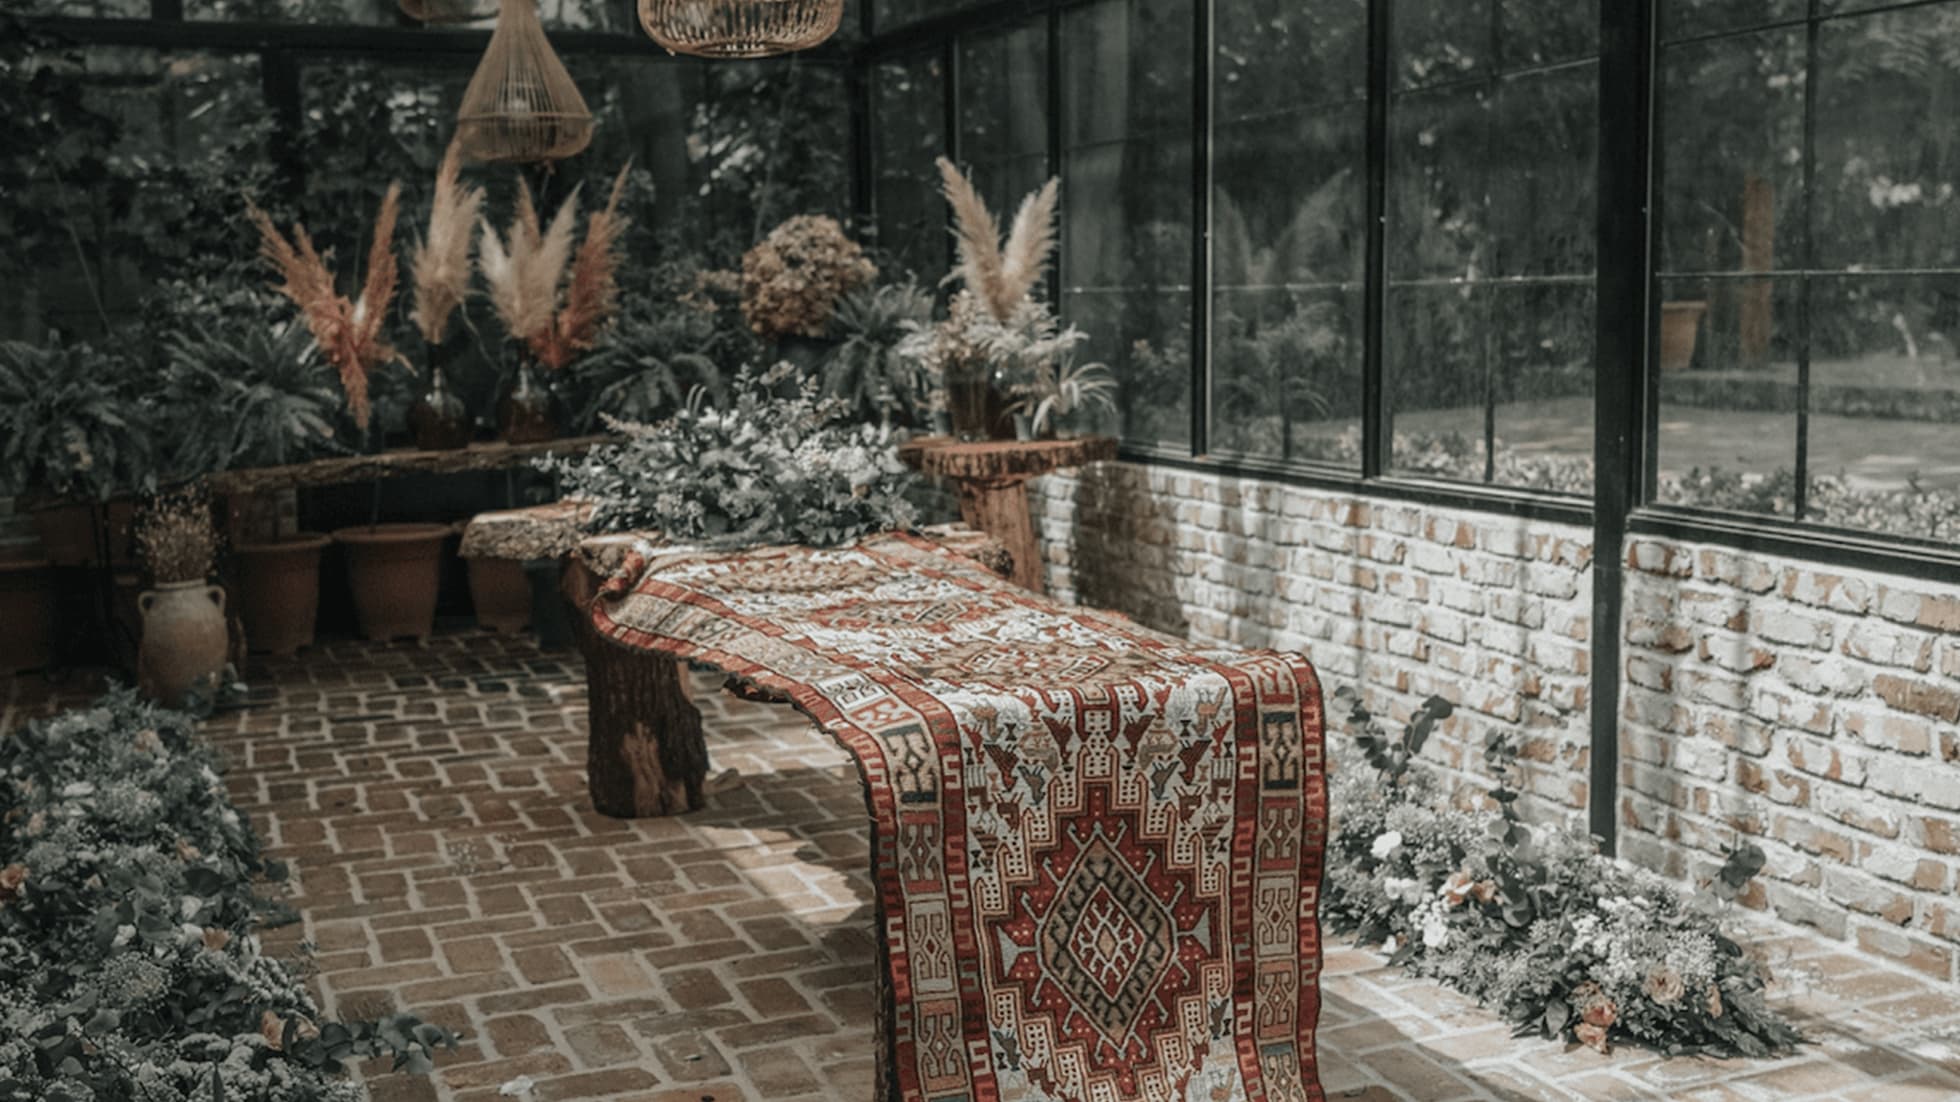 Vintage rug on the table in a patio